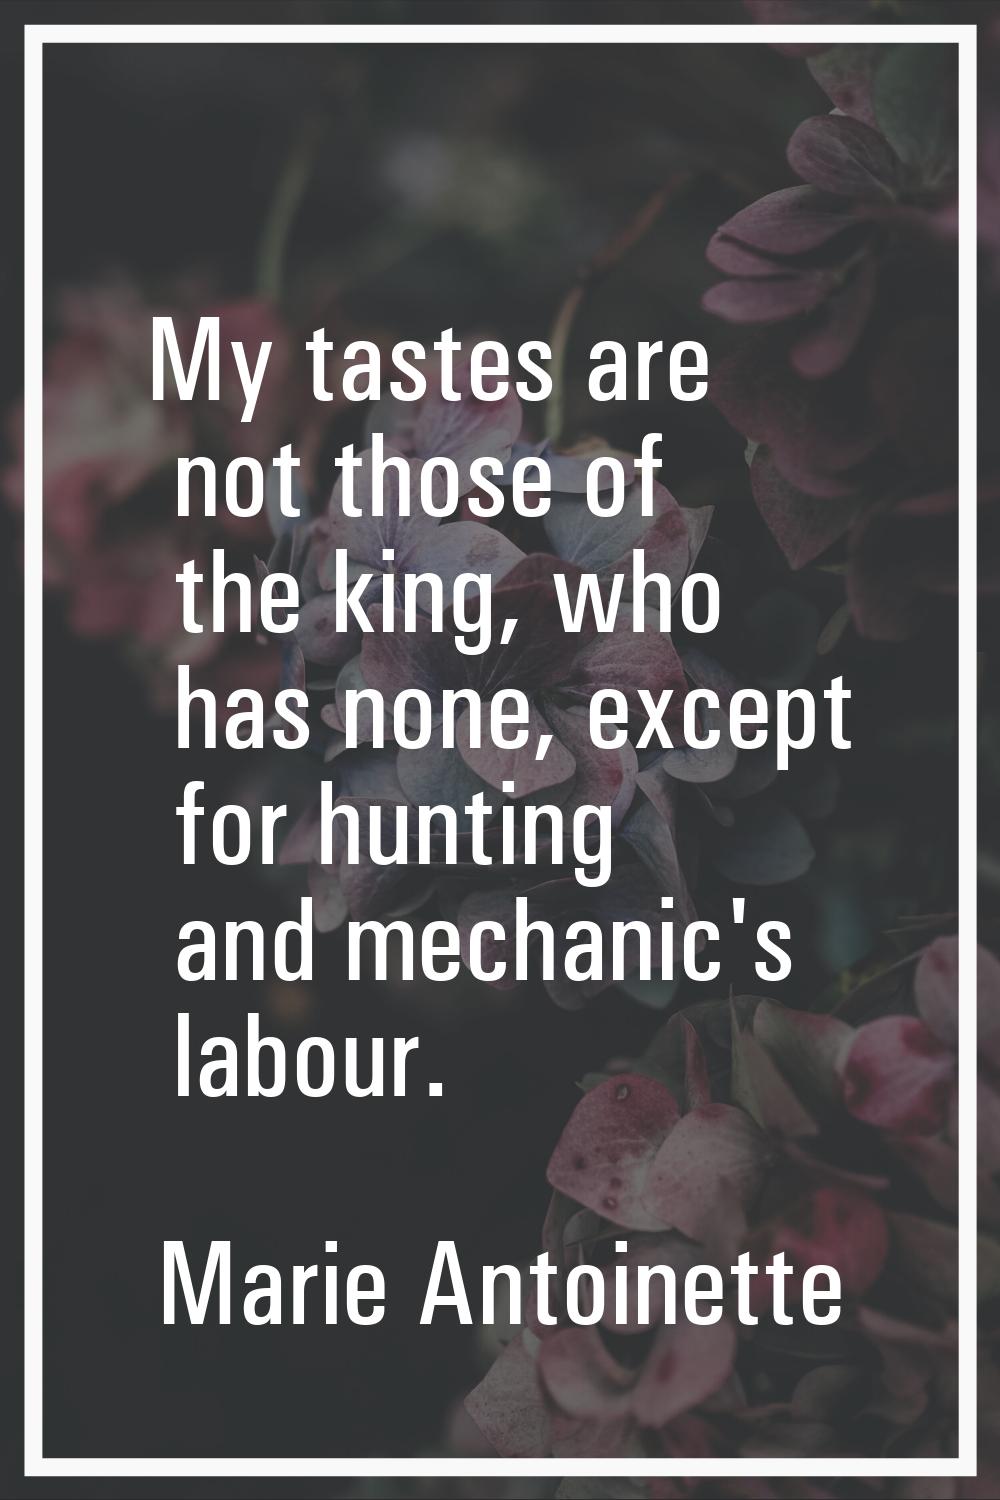 My tastes are not those of the king, who has none, except for hunting and mechanic's labour.